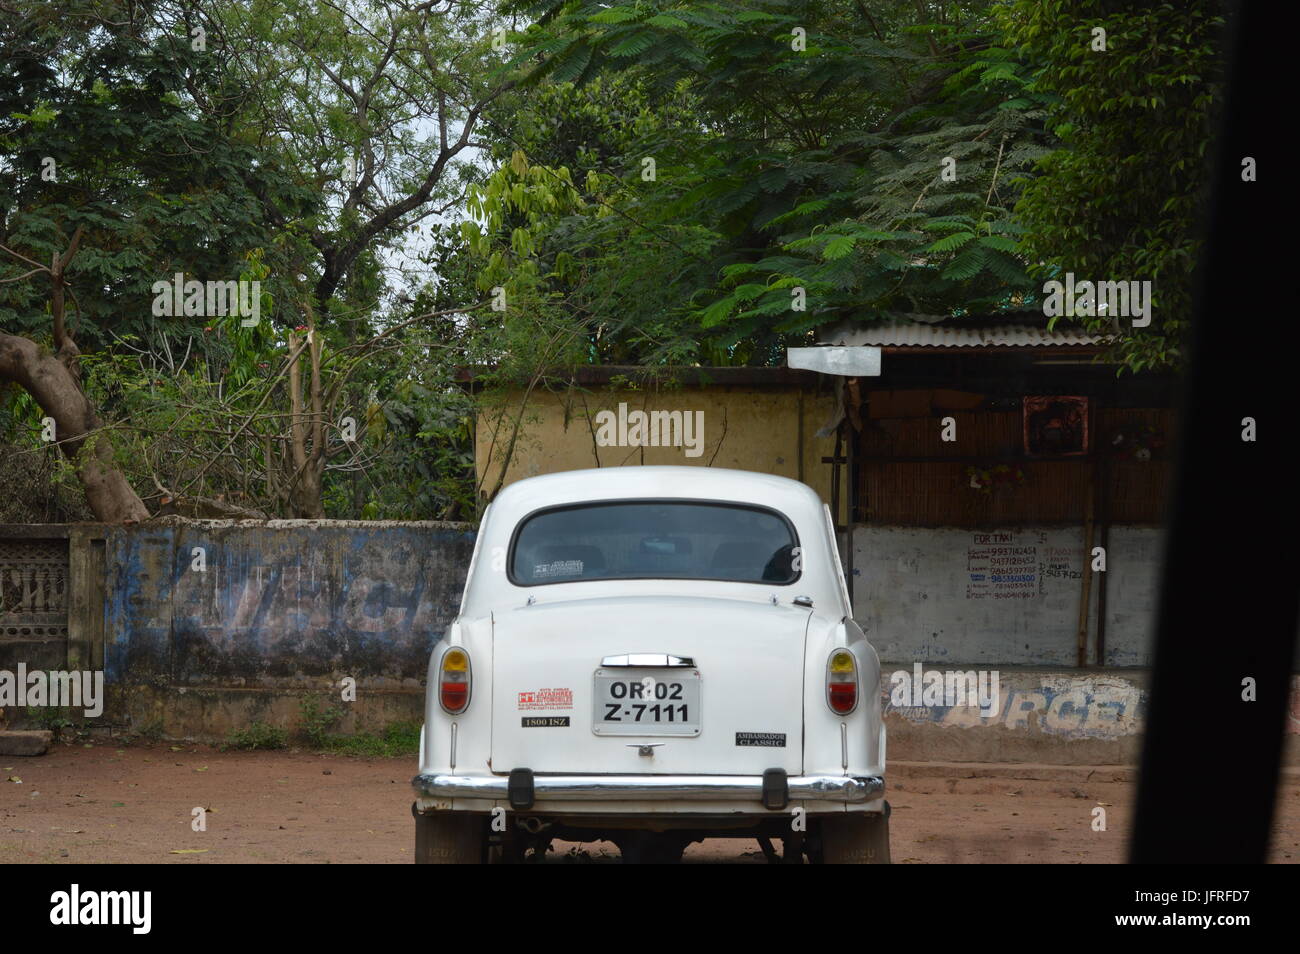 Ambassadors; These cars used to be seen everyone in India...now they're a rare finding in nature...only being used for political officers today Stock Photo